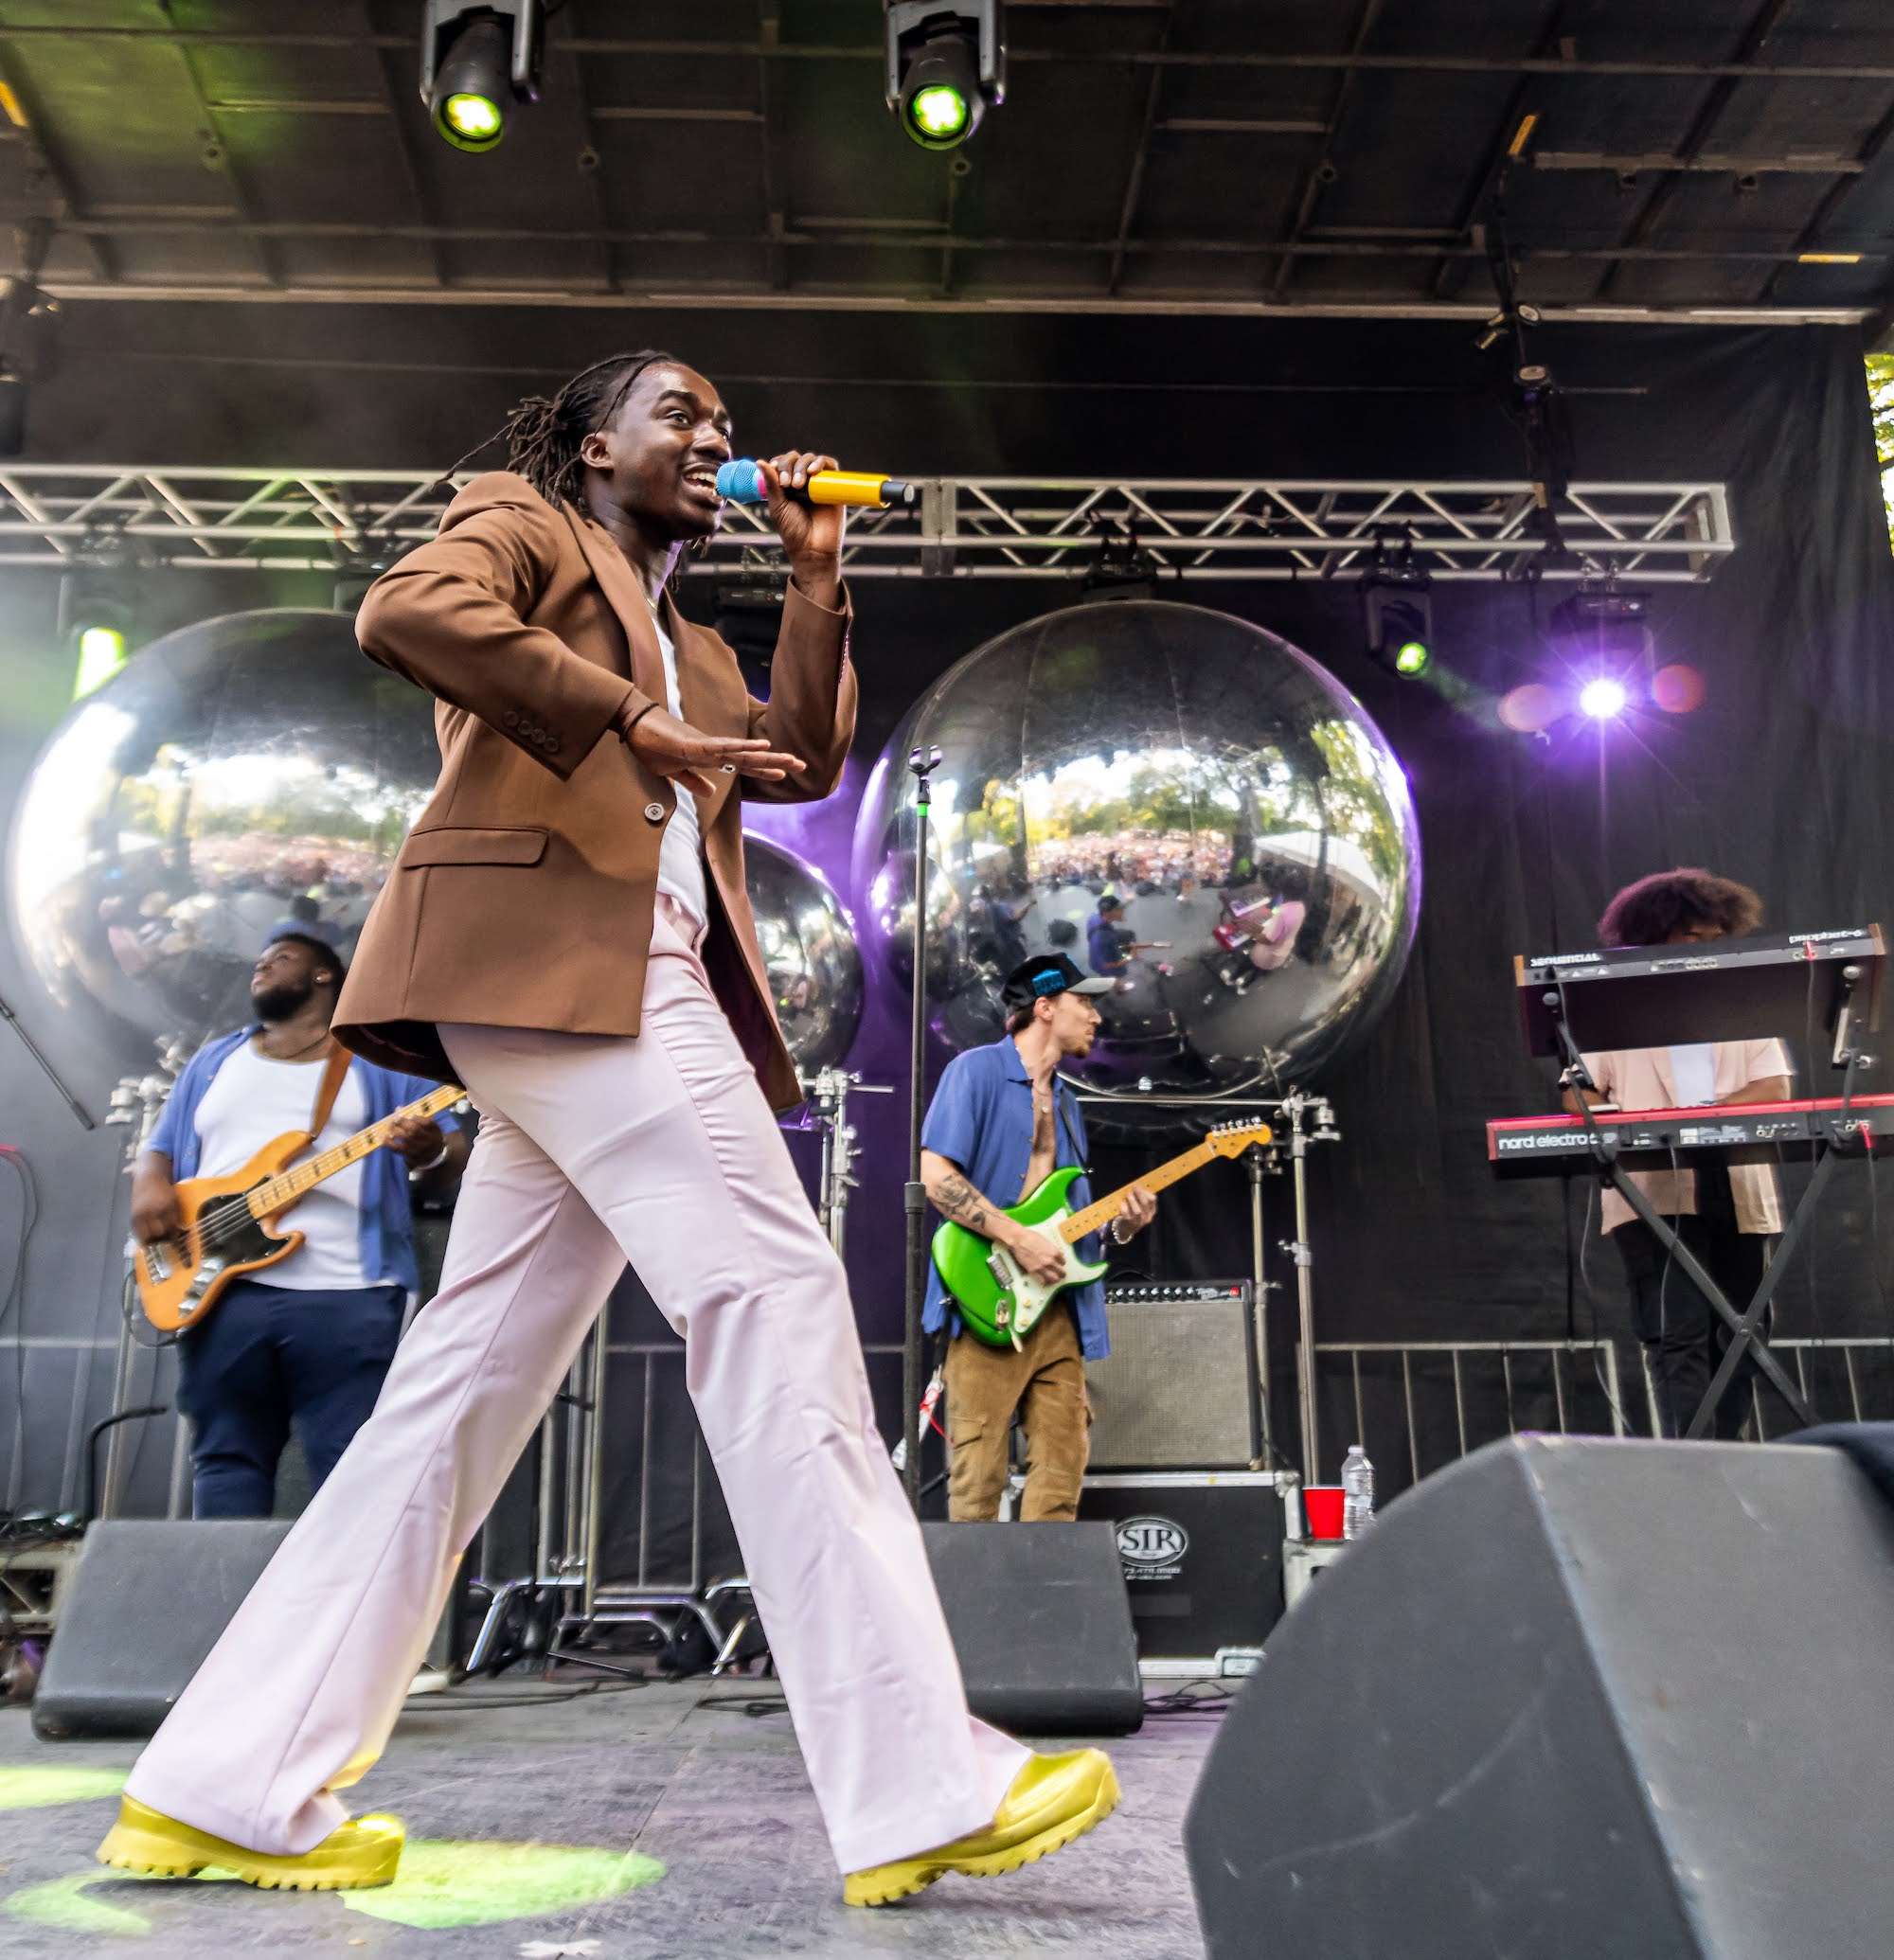 Ric Wilson Live At Pitchfork [GALLERY] 7